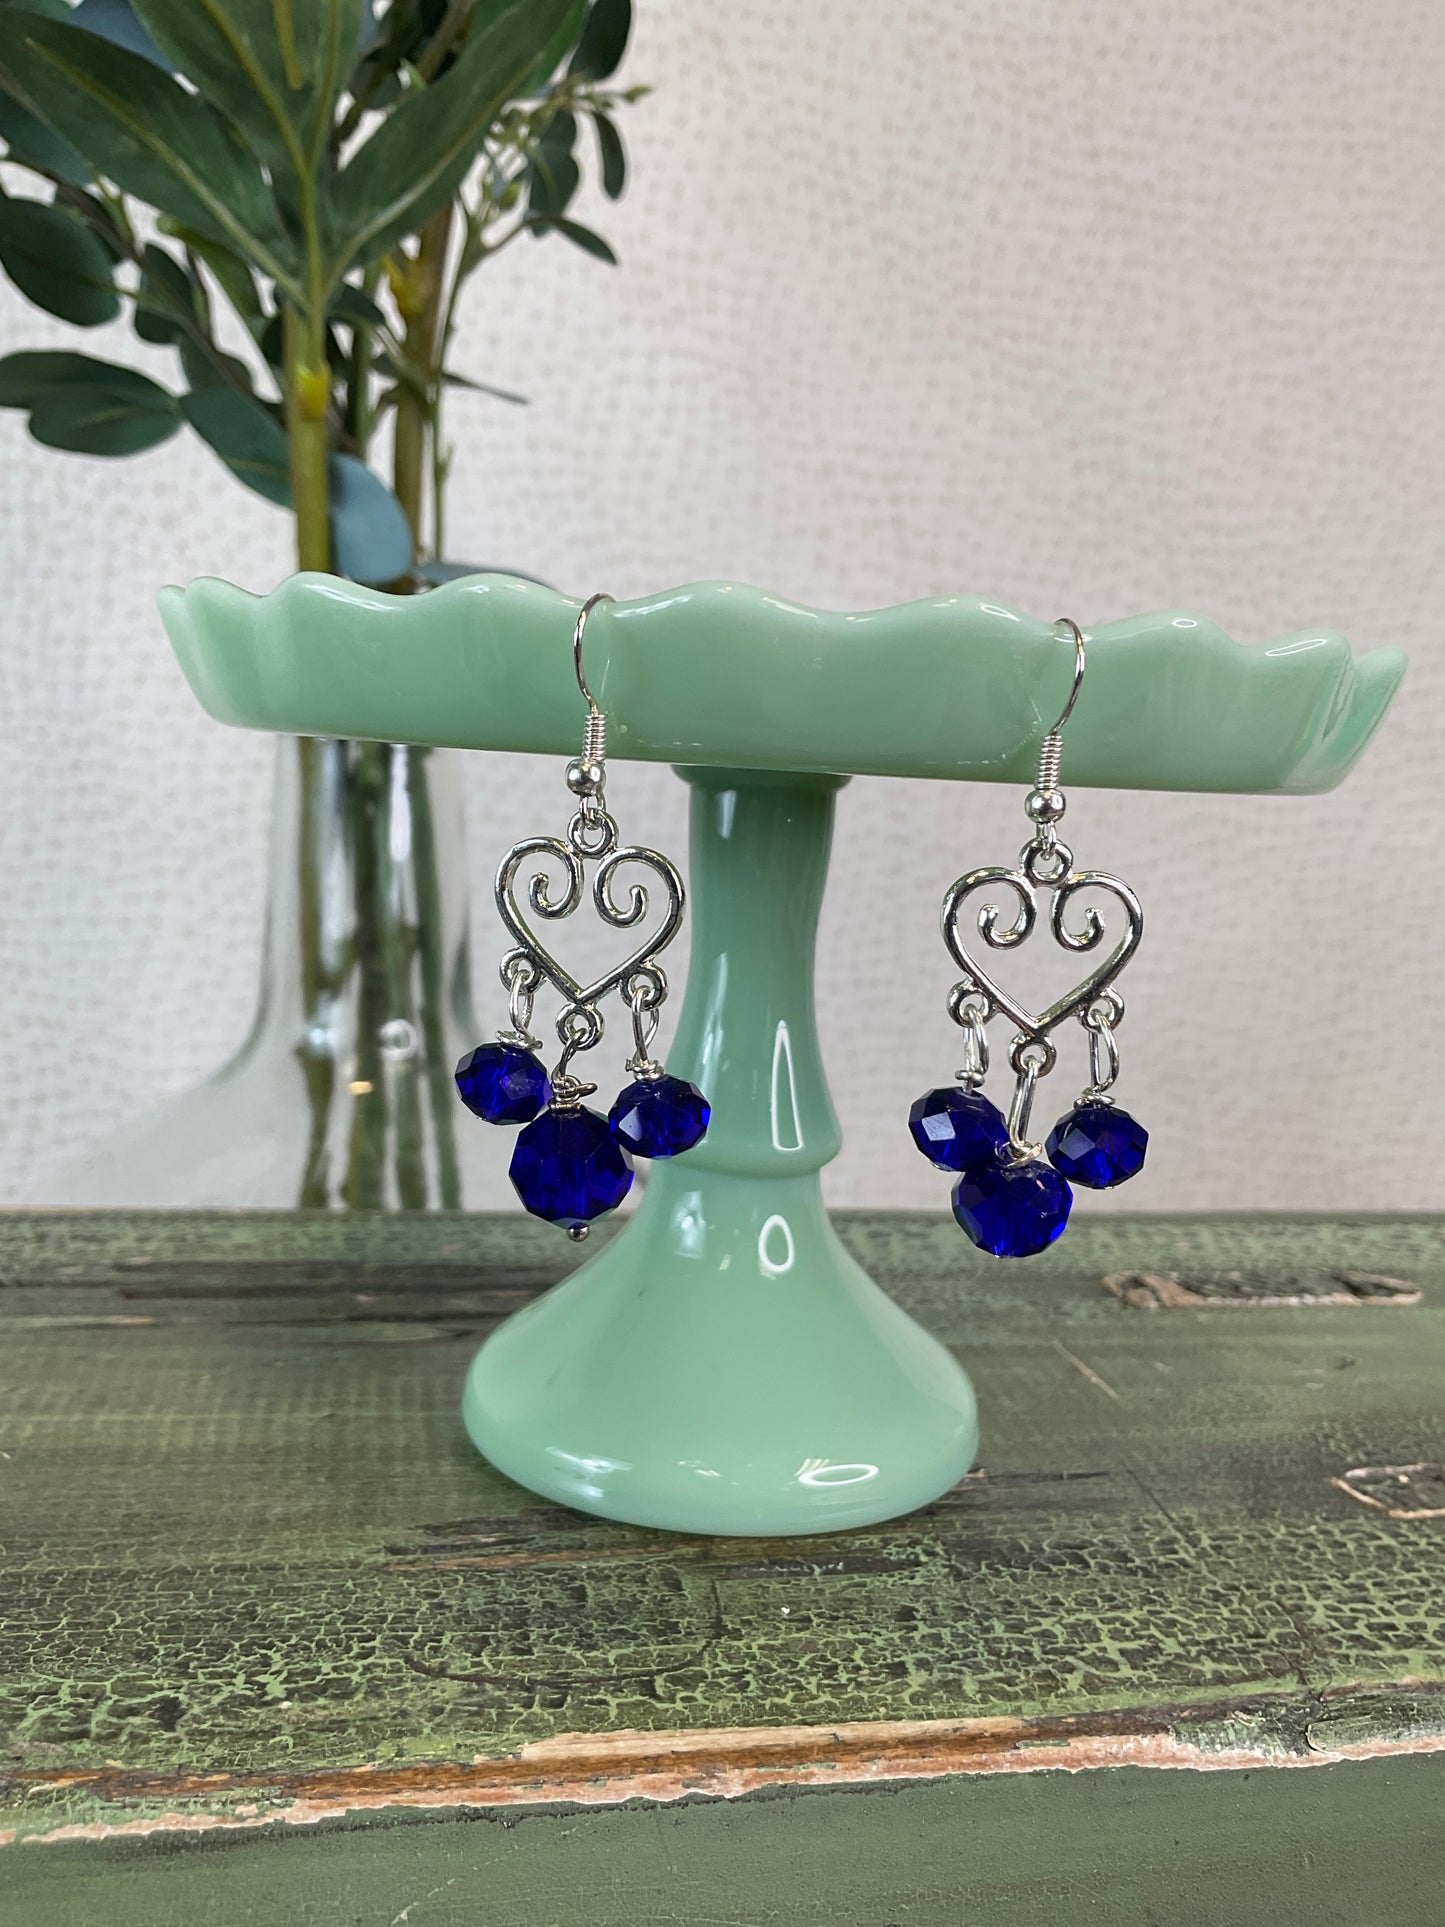 Scrolled Heart Droplet Earrings with Blue Beads